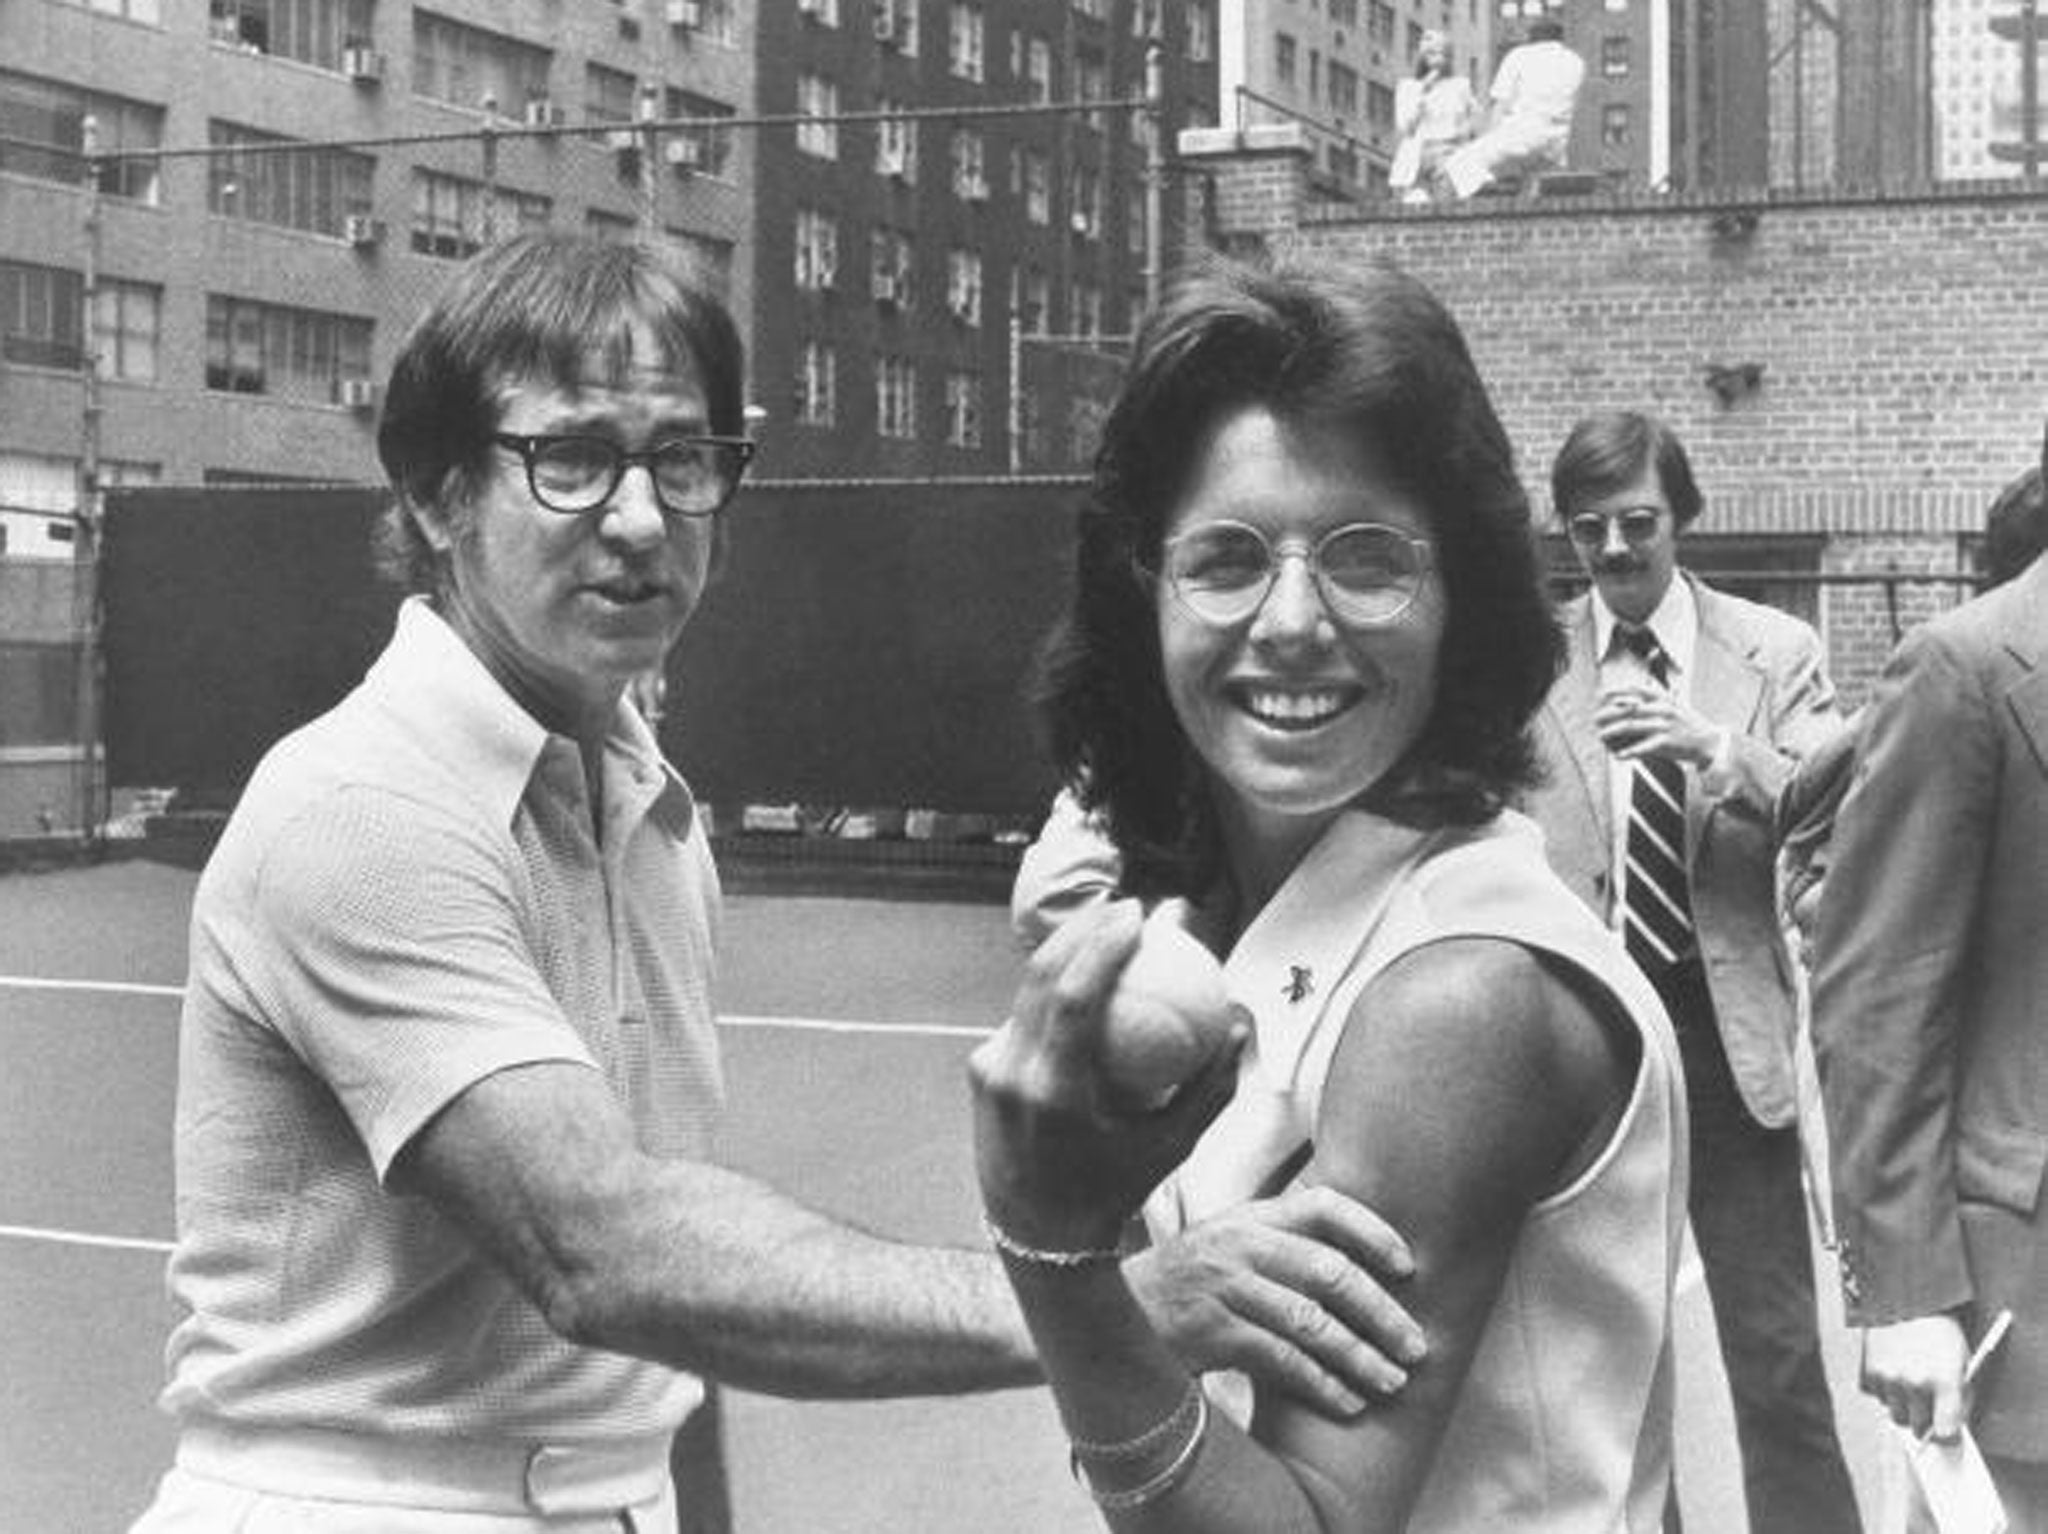 The match between Billie Jean King and Bobby Riggs was one of the biggest media events of its day